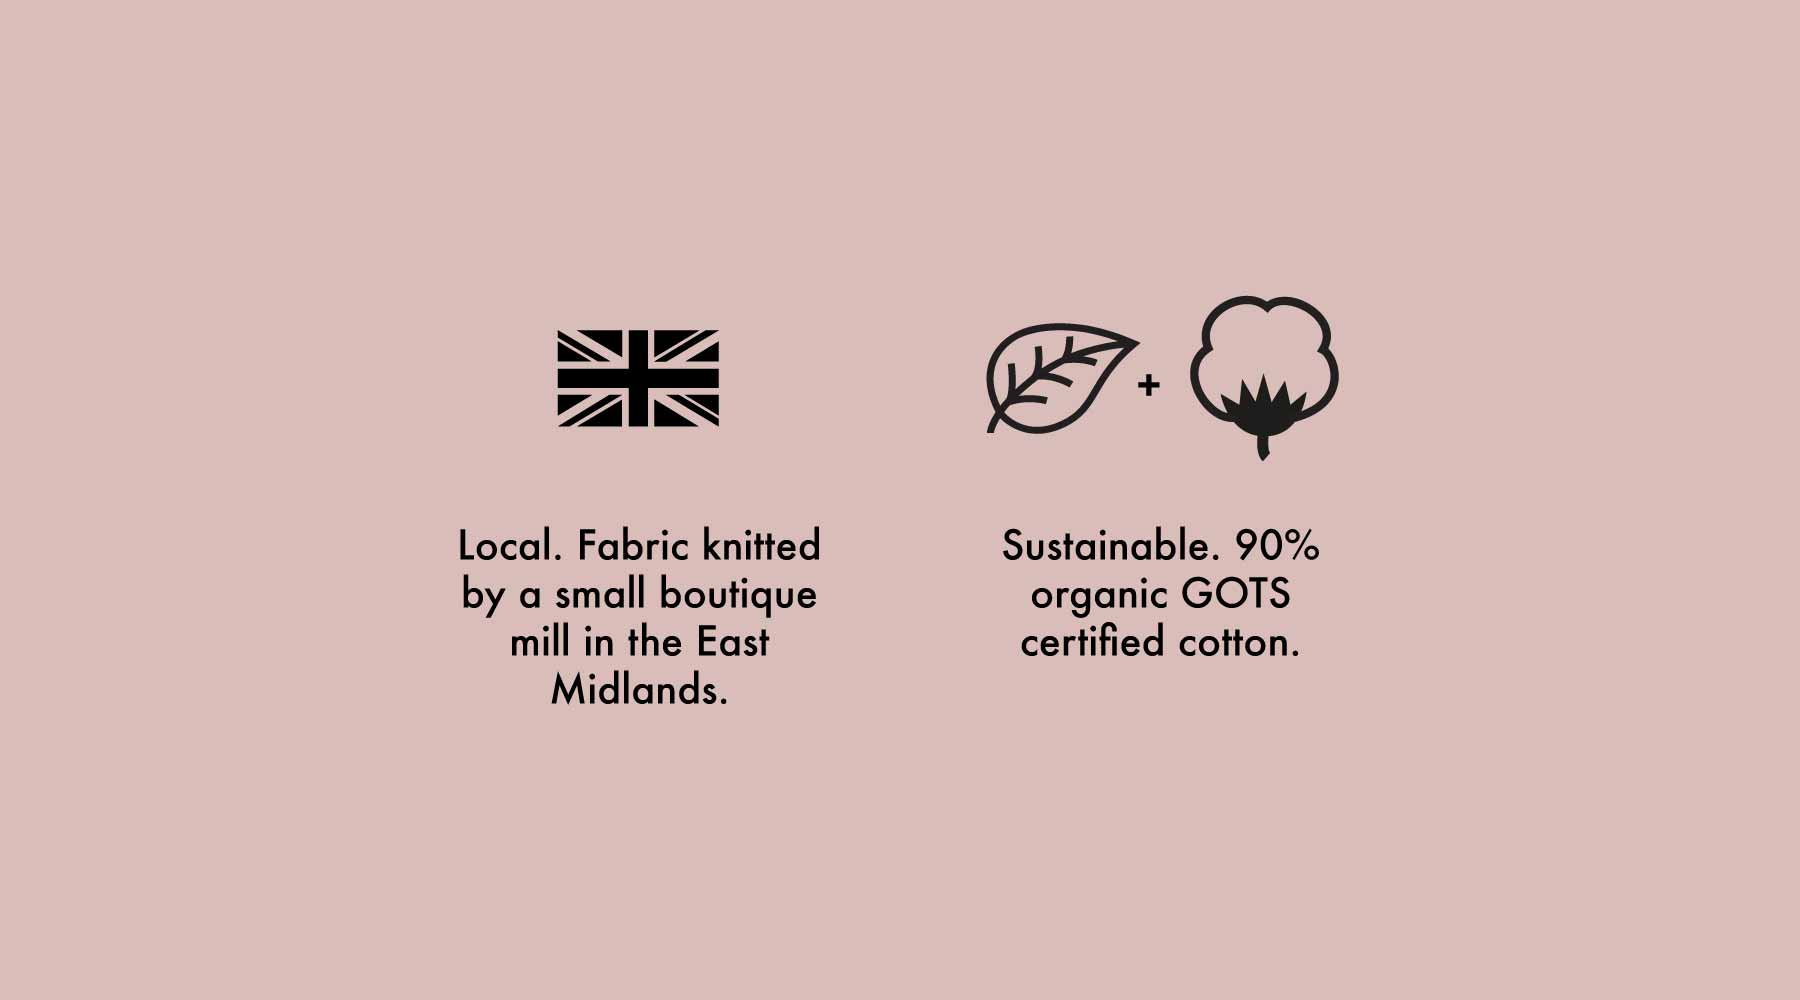 Symbols showing the Organic Fleece Fabric is made in the UK, is made from 90% GOTS Certified organic cotton